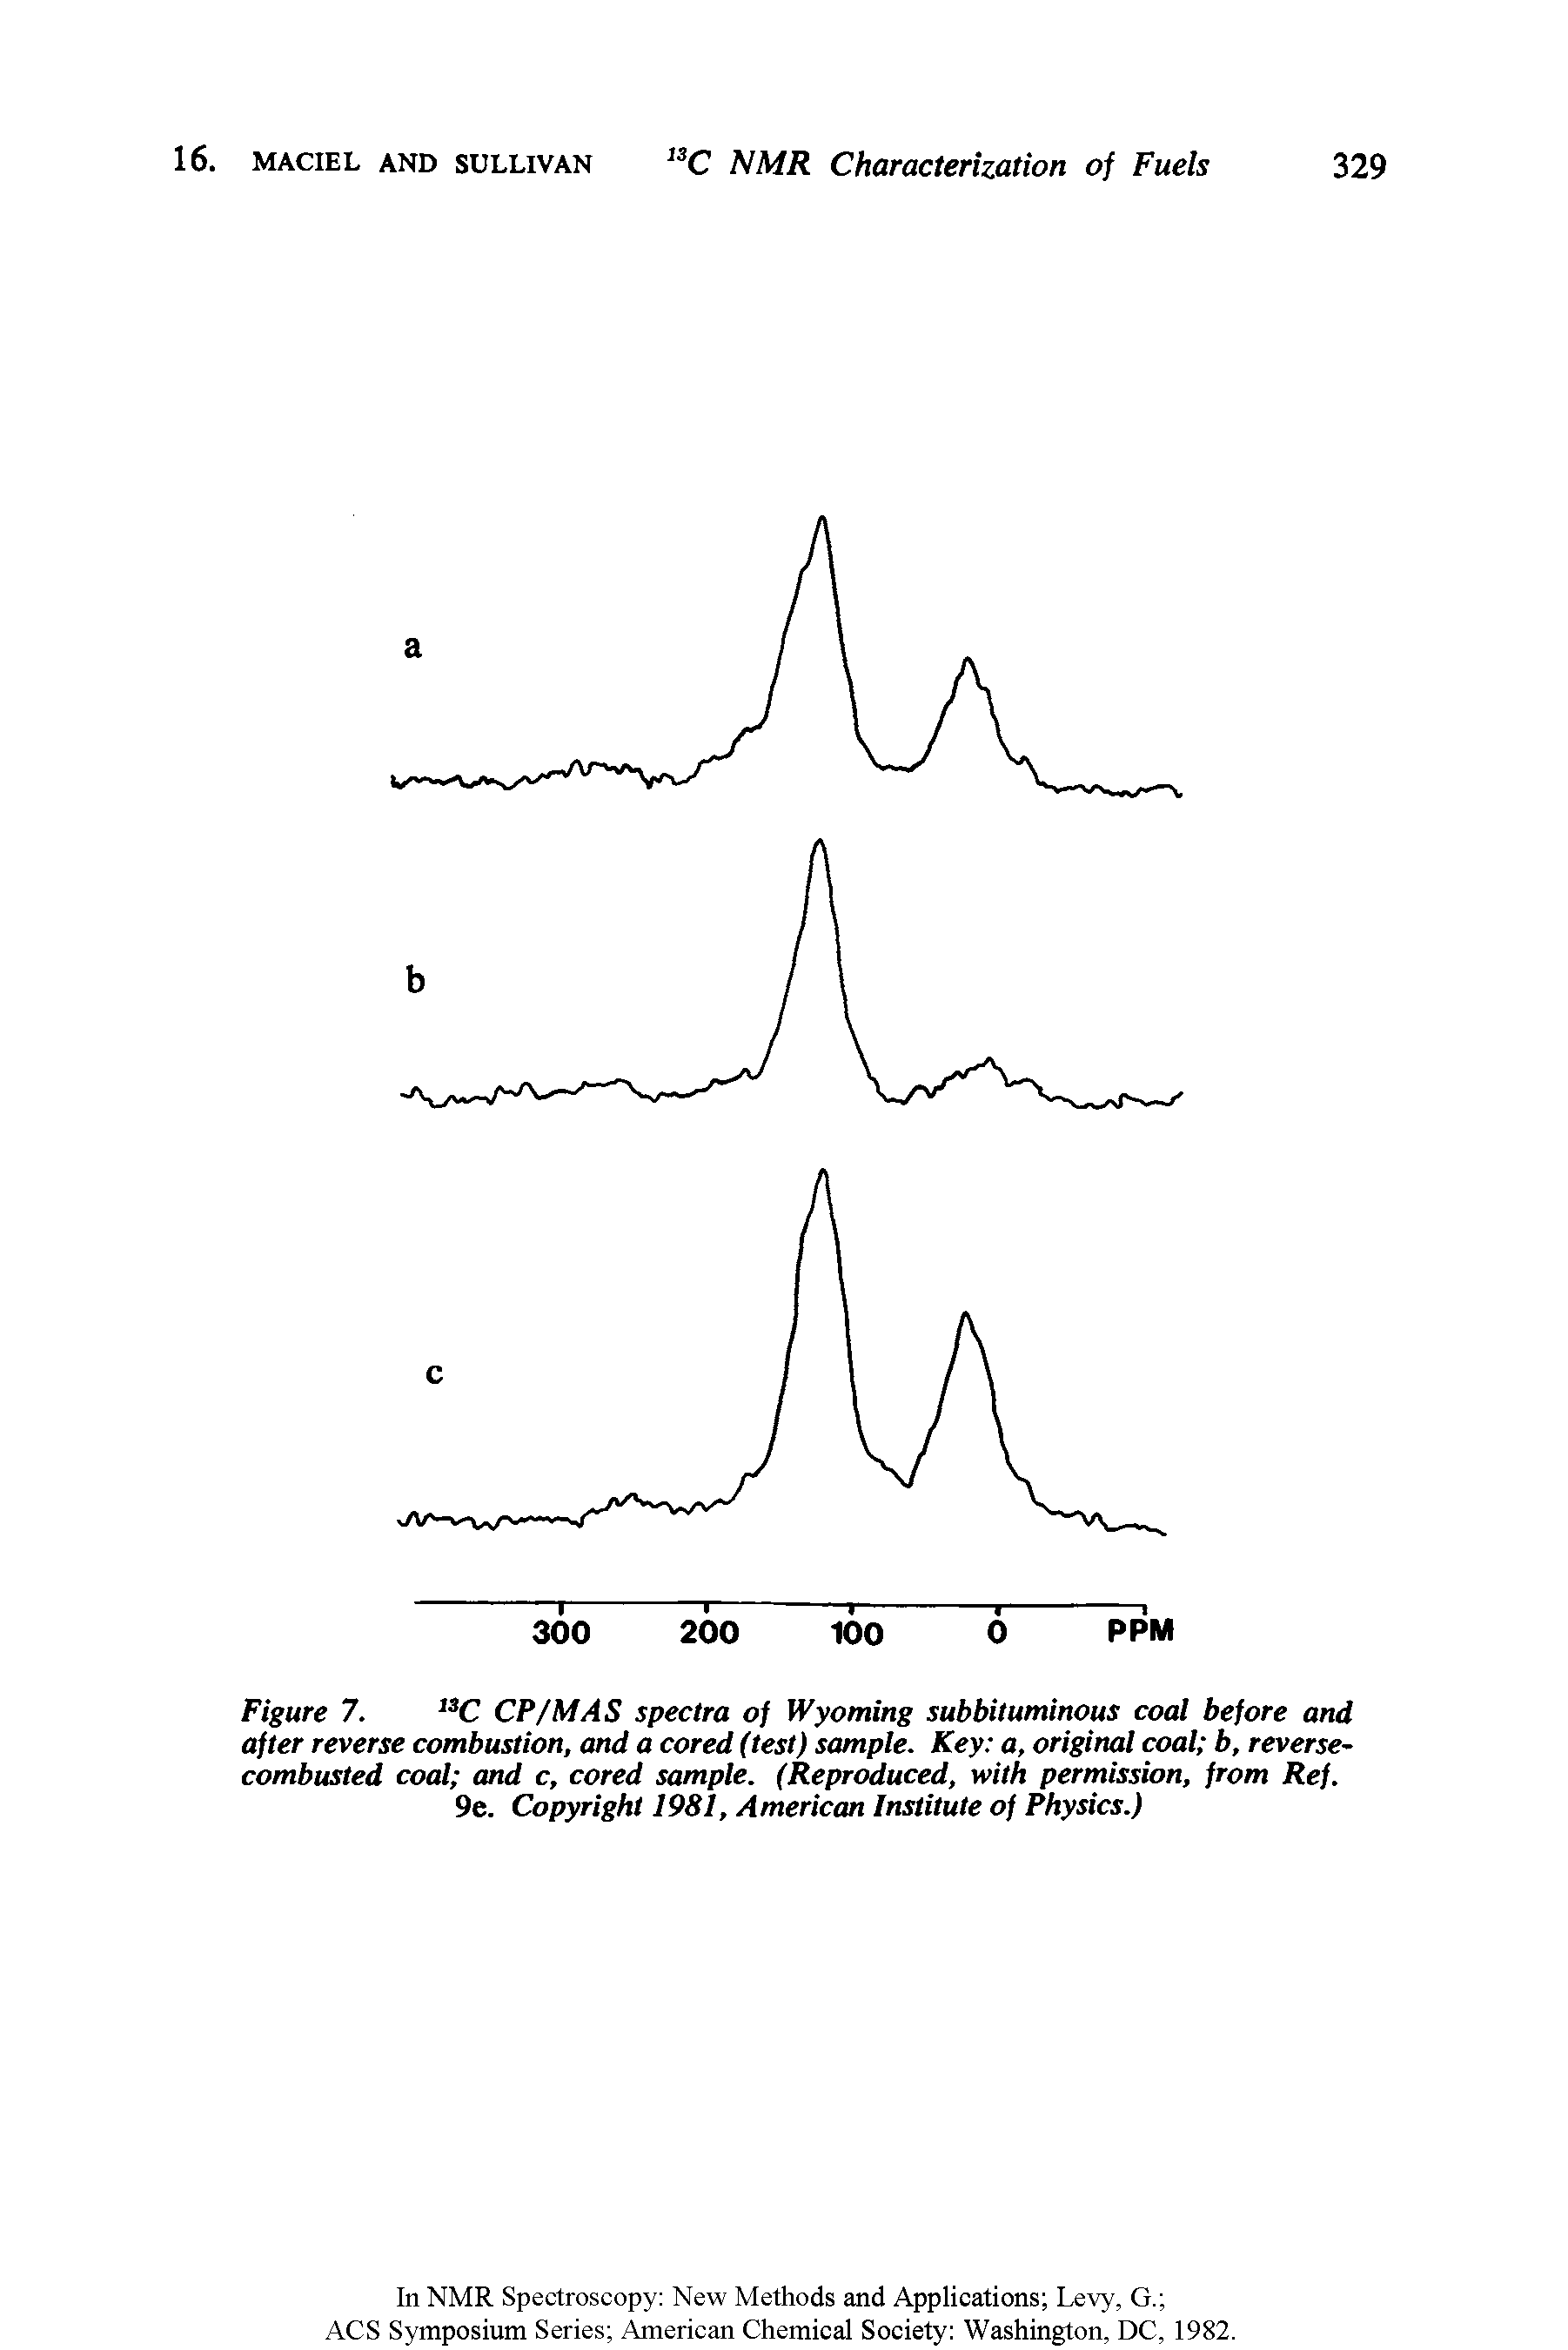 Figure 7. C CP/MAS spectra of Wyoming subbituminous coal before and after reverse combustion, and a cored (test) sample. Key a, original coal b, reverse-combusted coal and c, cored sample. (Reproduced, with permission, from Ref. 9e. Copyright 1981, American Institute of Physics.)...